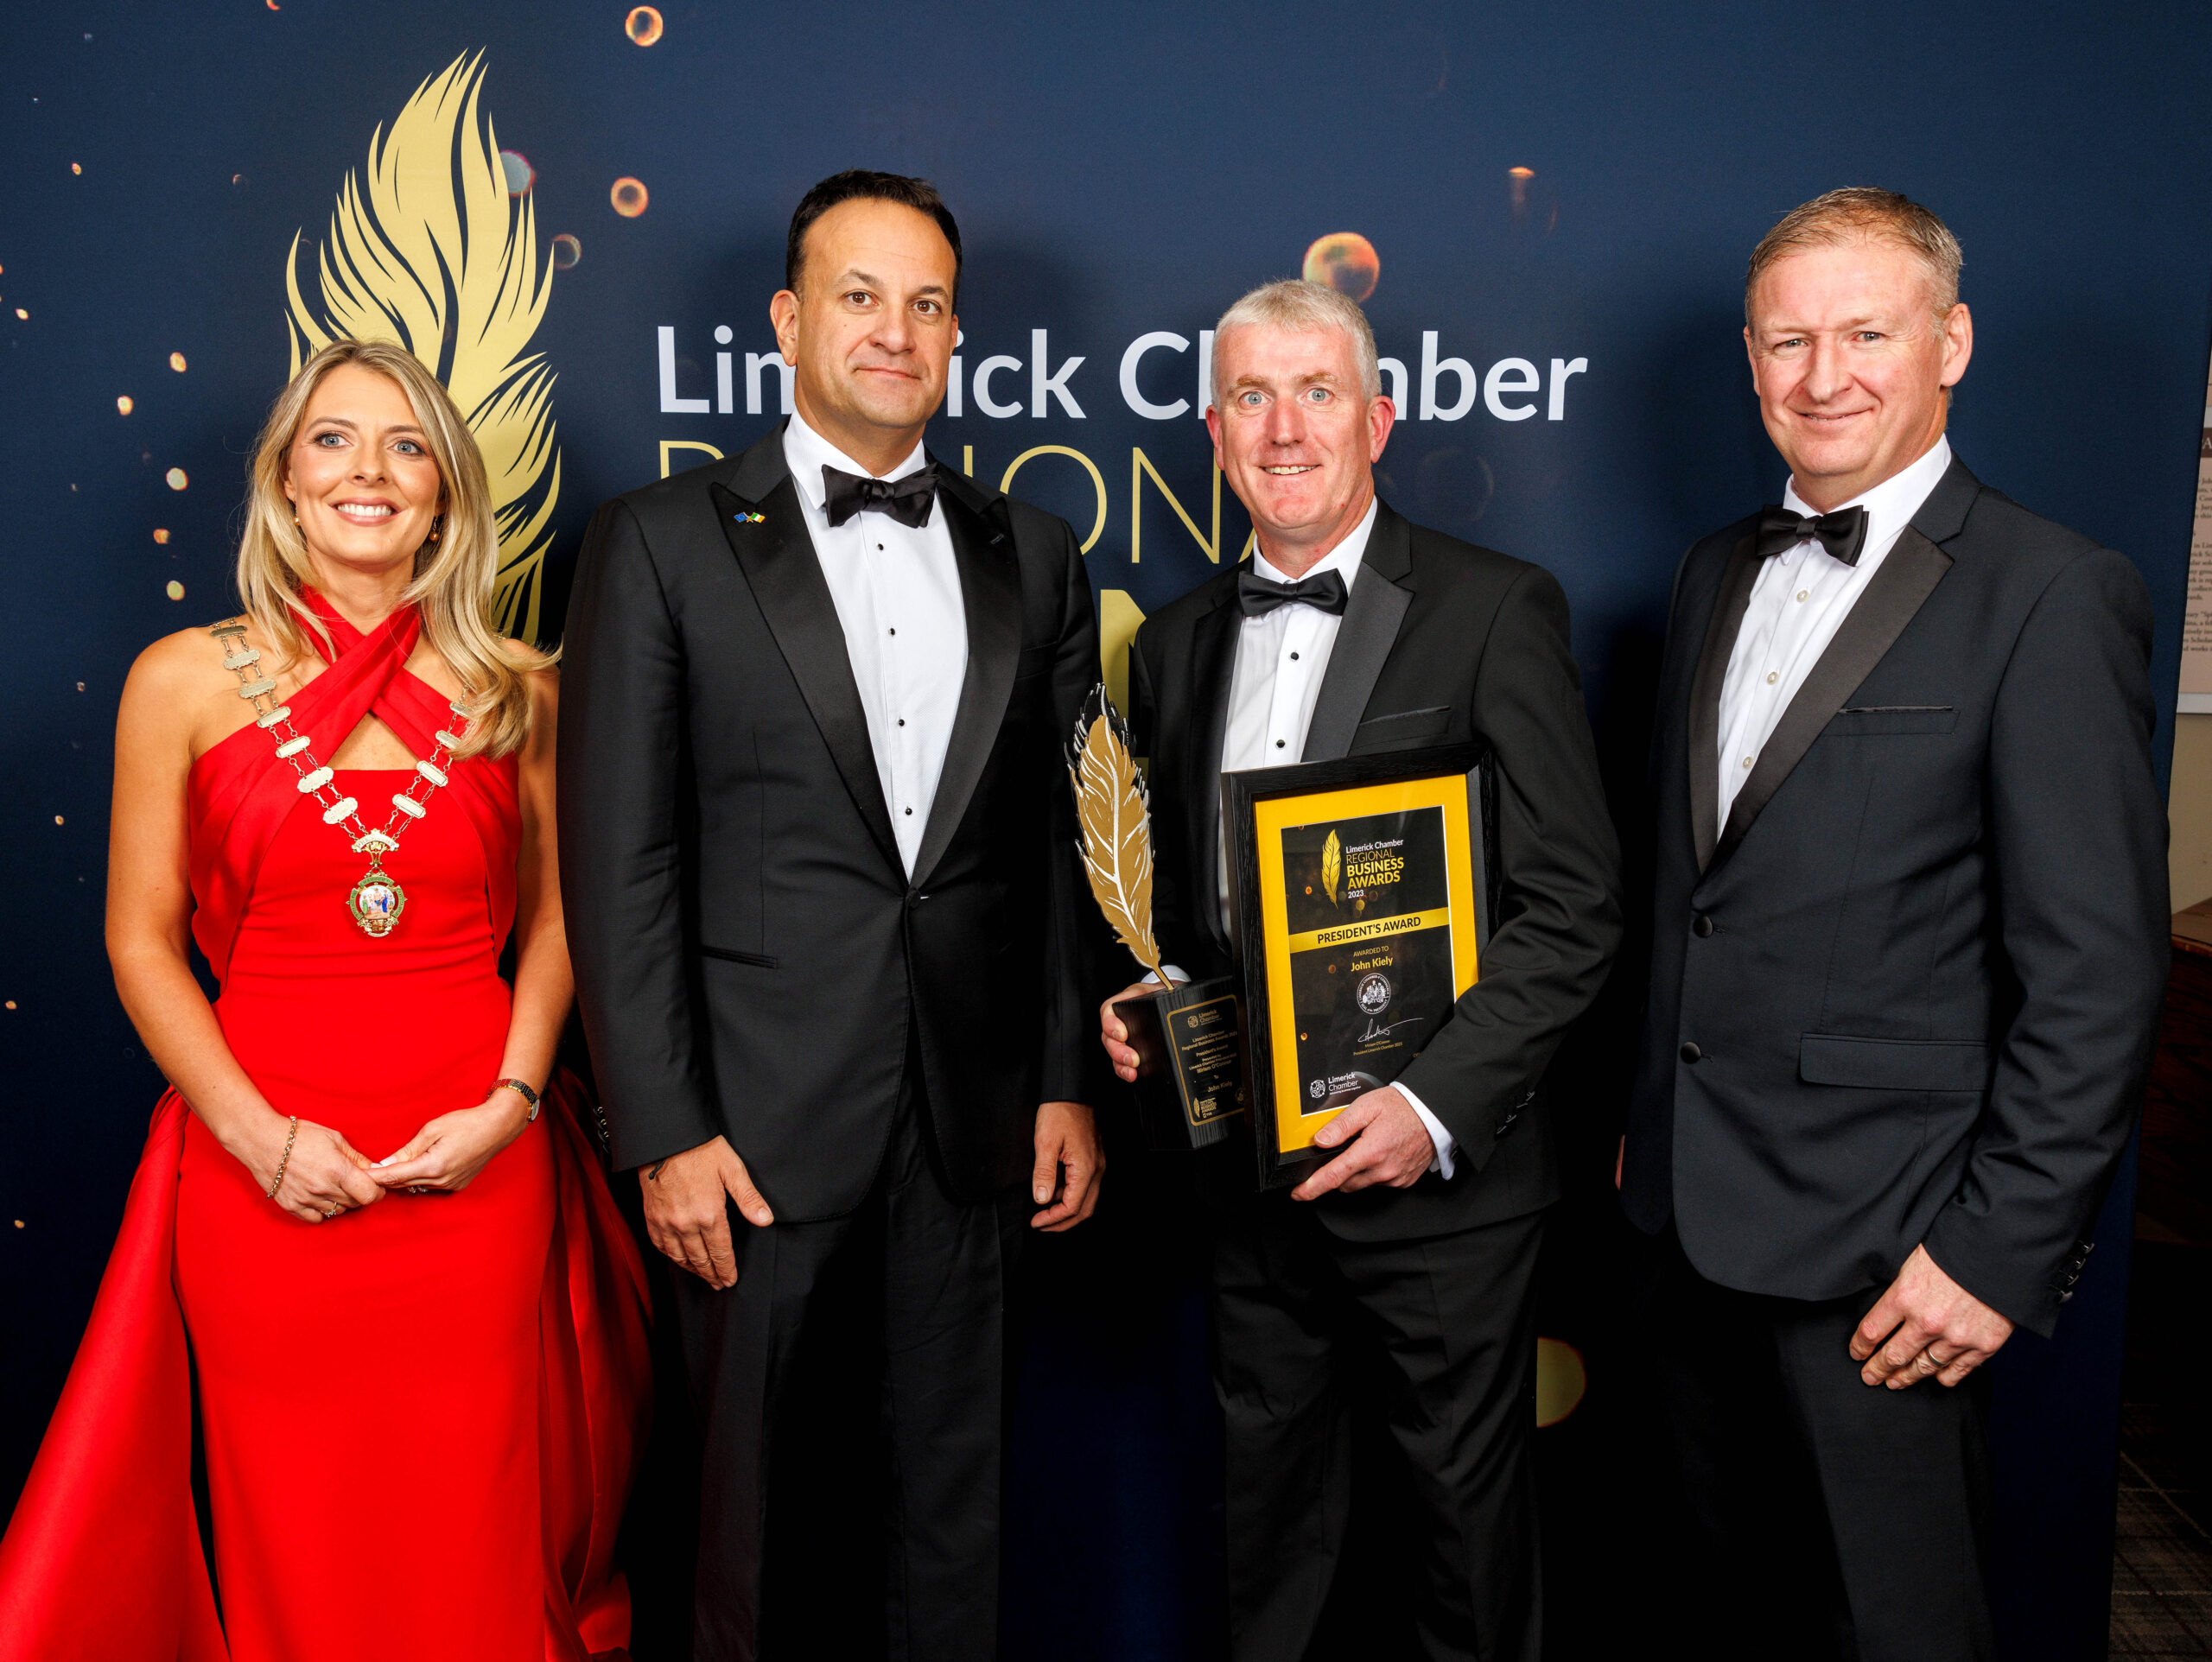 Pictured at Limerick Chamber President’s Dinner & Regional Business Awards, attended by Taoiseach Leo Varadkar, were L-R, Miriam O'Connor, President Limerick Chamber, An Taoiseach Leo Varadkar, John Kiely and Damien Garrihy, AIB . The 2023 Chamber President's award was presented to Limerick hurling manager John Kiely on behalf of the entire squad for the inspiration they've given, including Limerick businesses, through their remarkable achievements in winning four-in-a row All-Ireland senior hurling titles and five in six years. Overall Company of the Year award went to health-tech company Carelon Global Solutions Ireland, which is one of the newest additions to Limerick's thriving FDI sector and has hired 230 people since it was launched in Limerick two years ago this month.